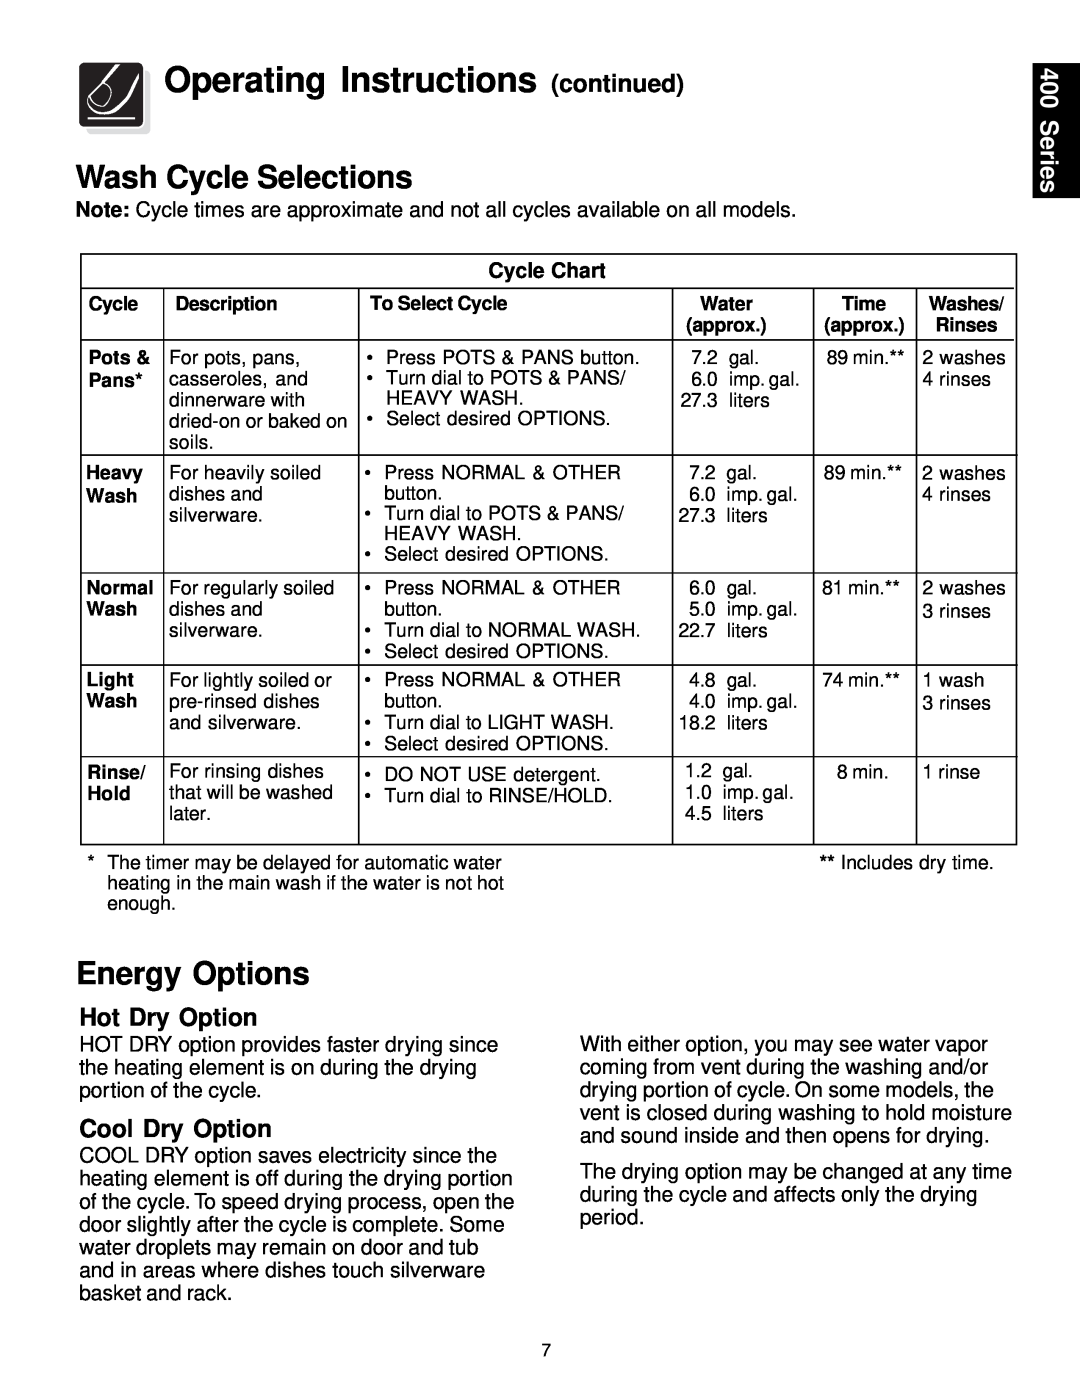 Frigidaire 400 Series warranty Operating Instructions continued, Wash Cycle Selections, Energy Options, Cycle Chart 